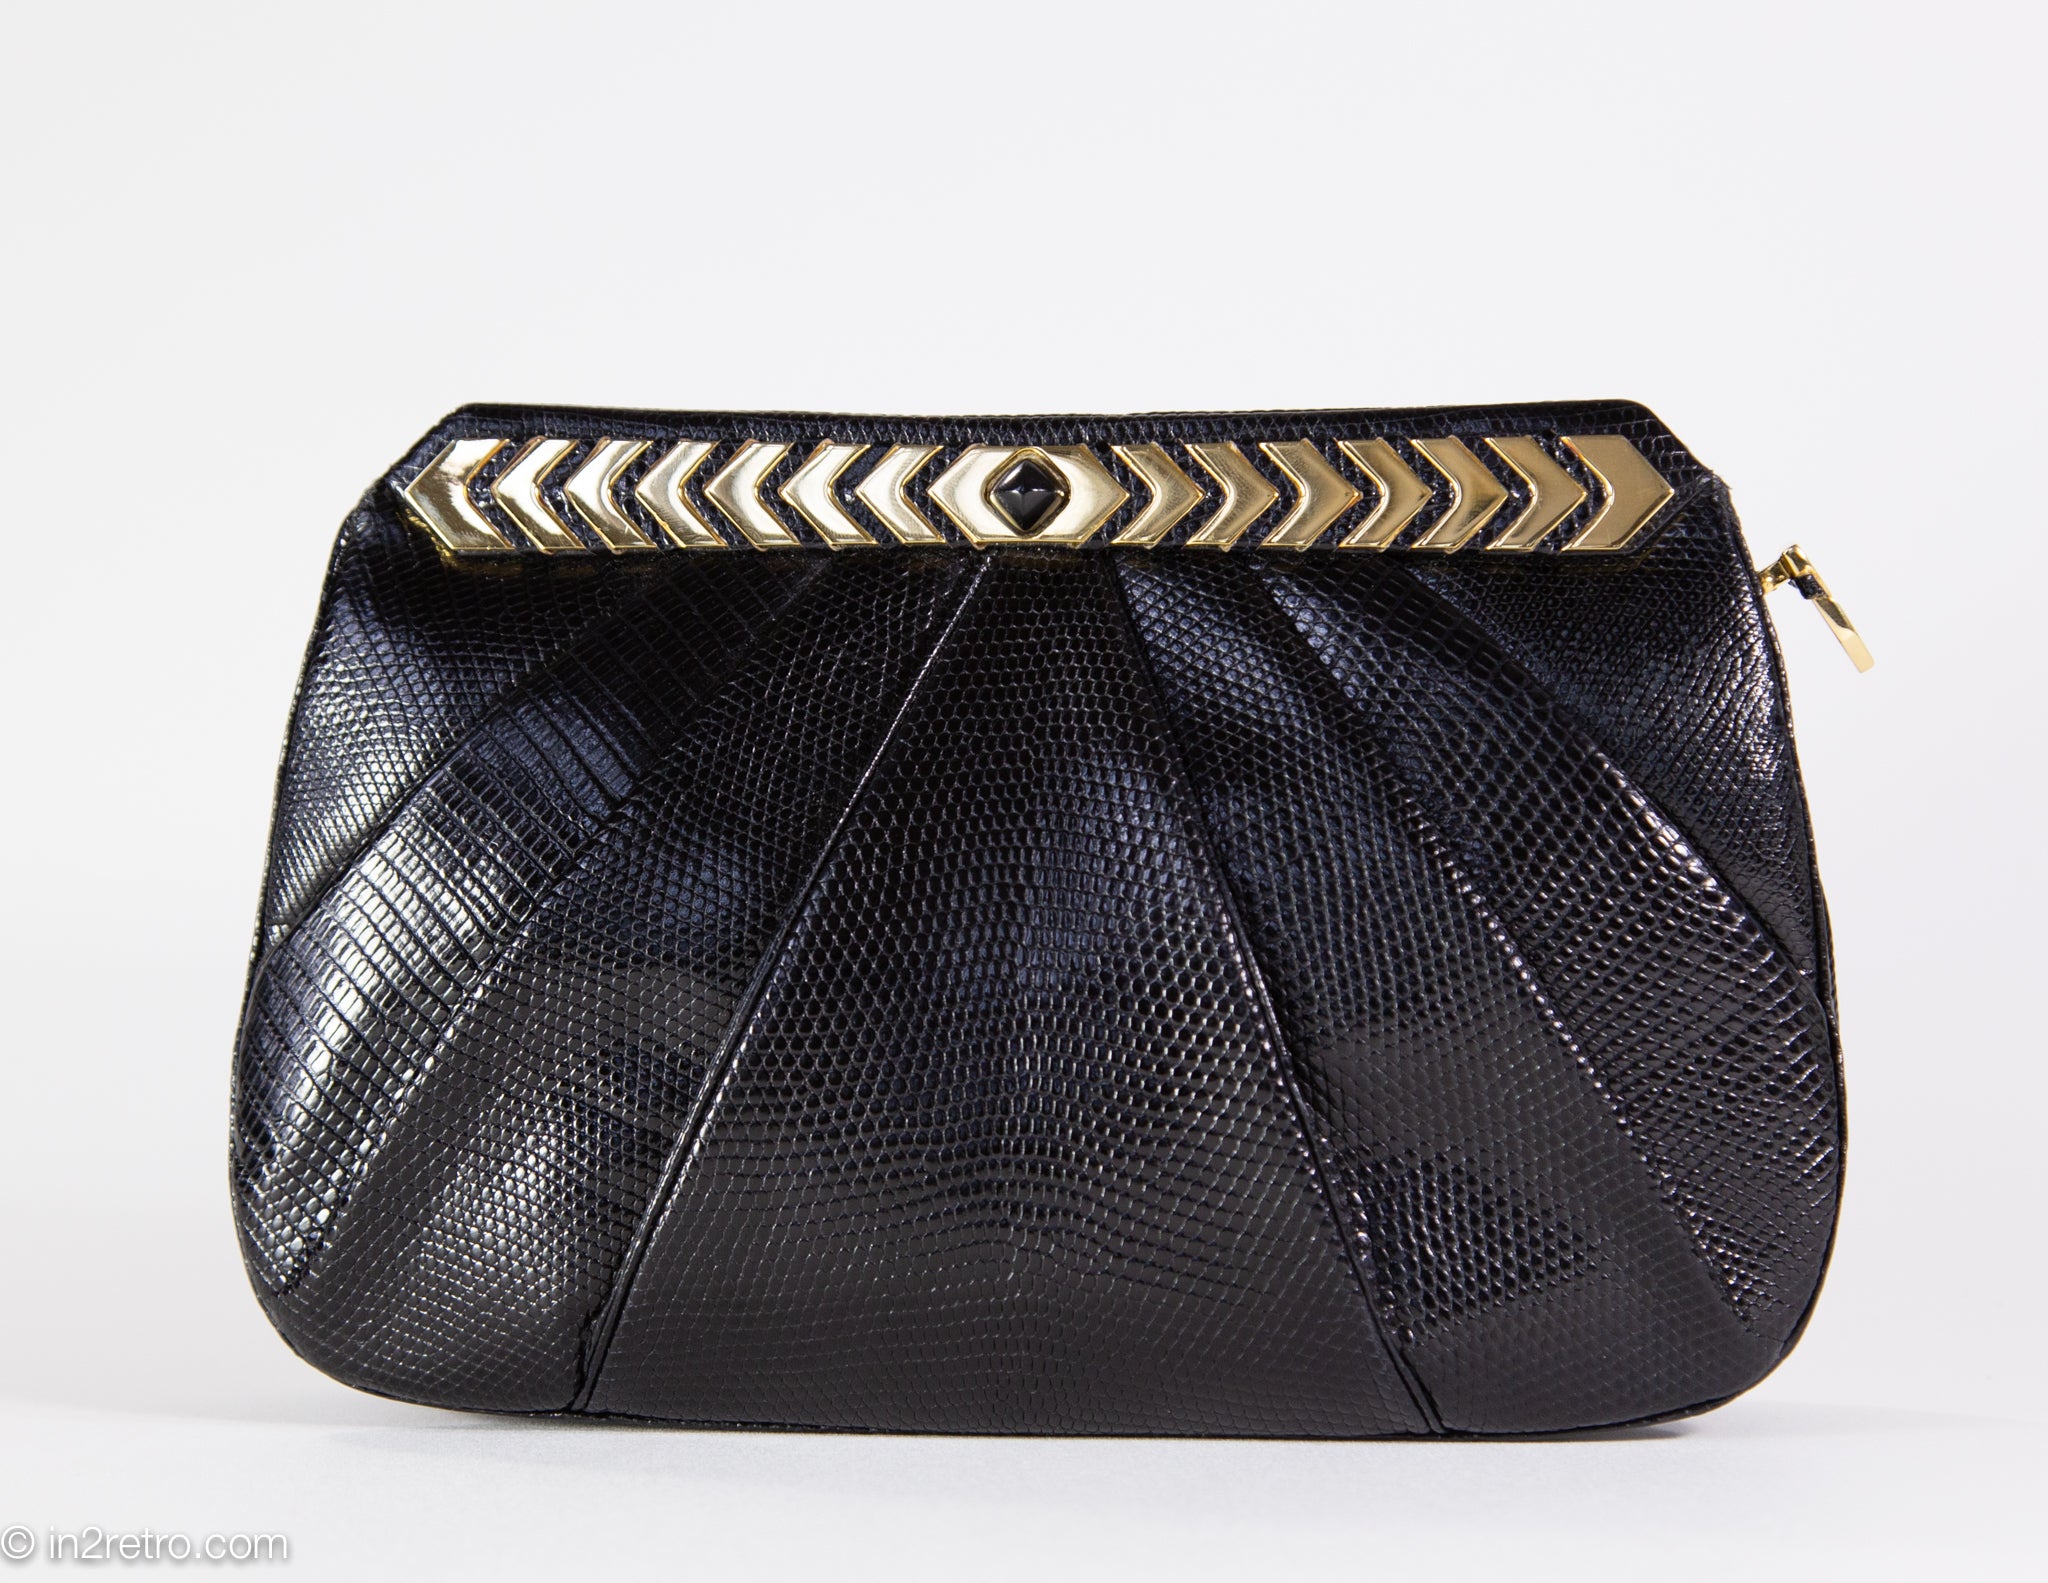 VINTAGE AUTHENTIC JUDITH LEIBER BLACK DECO INSPIRED KARUNG REPTILE SHO –  in2retro